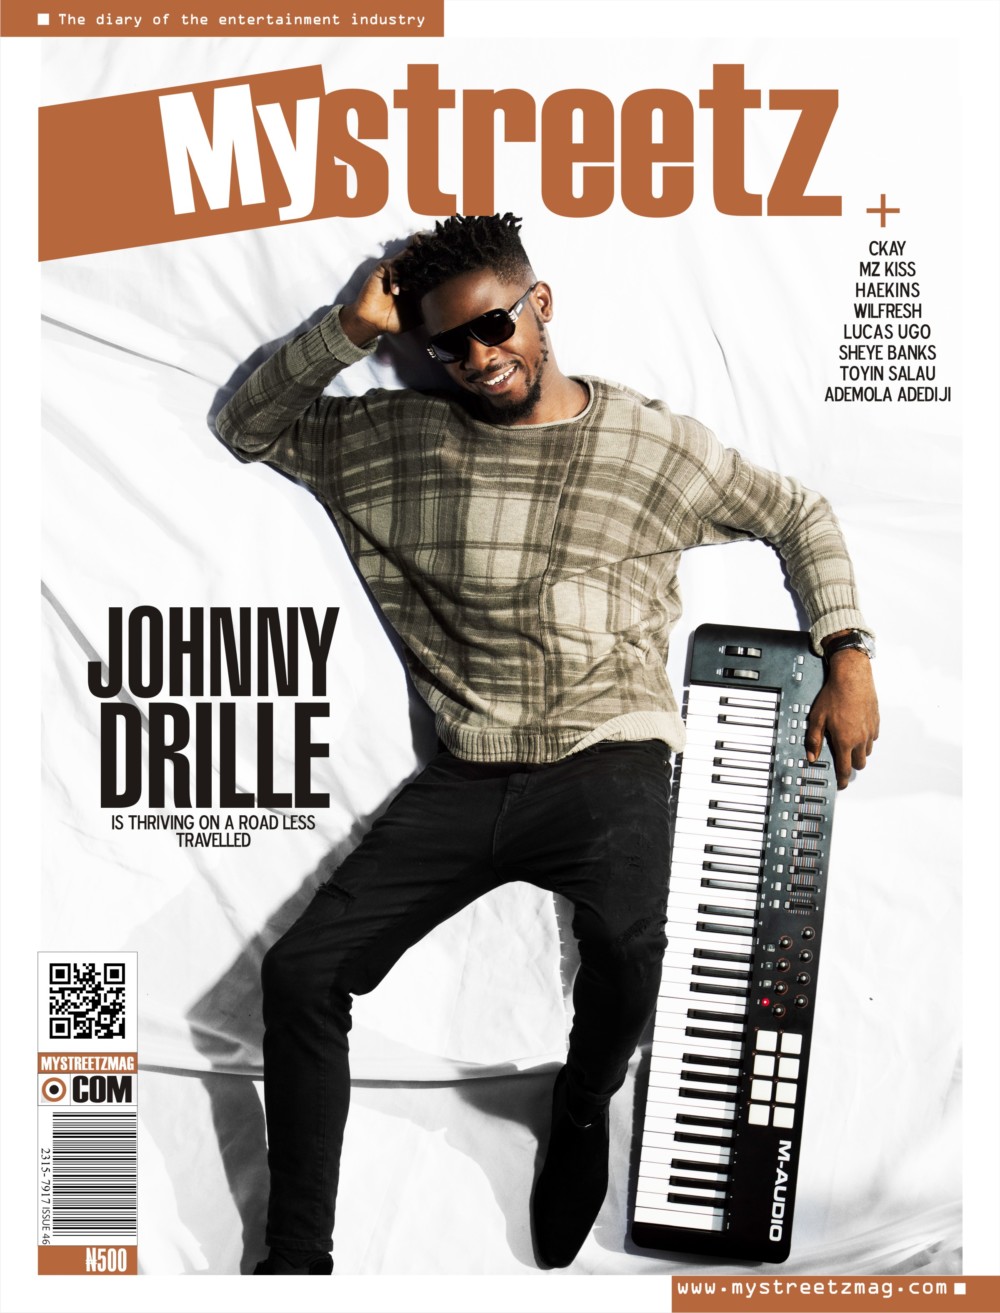 Johnny Drille covers latest issue of MyStreetz magazine